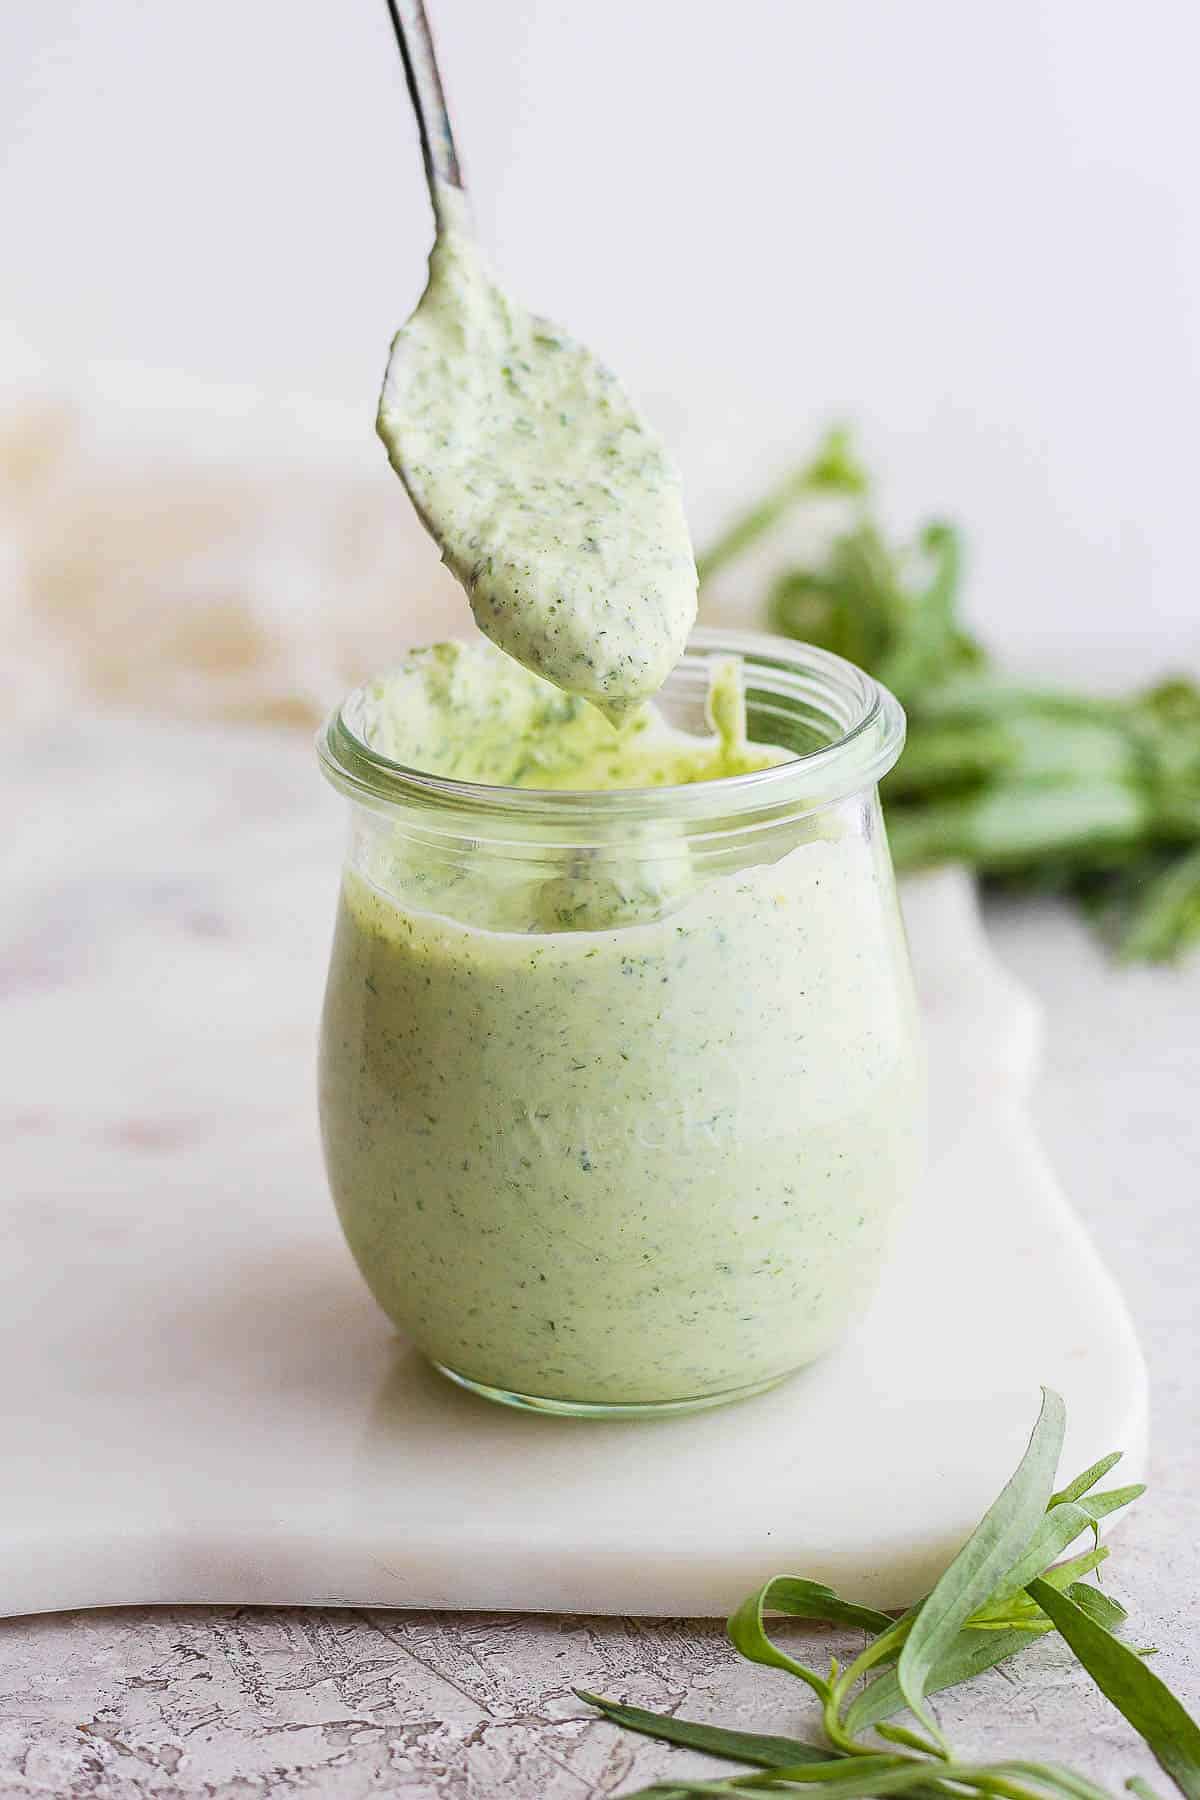 Green goddess salad dressing in a small jar and a spoon scooping some out.